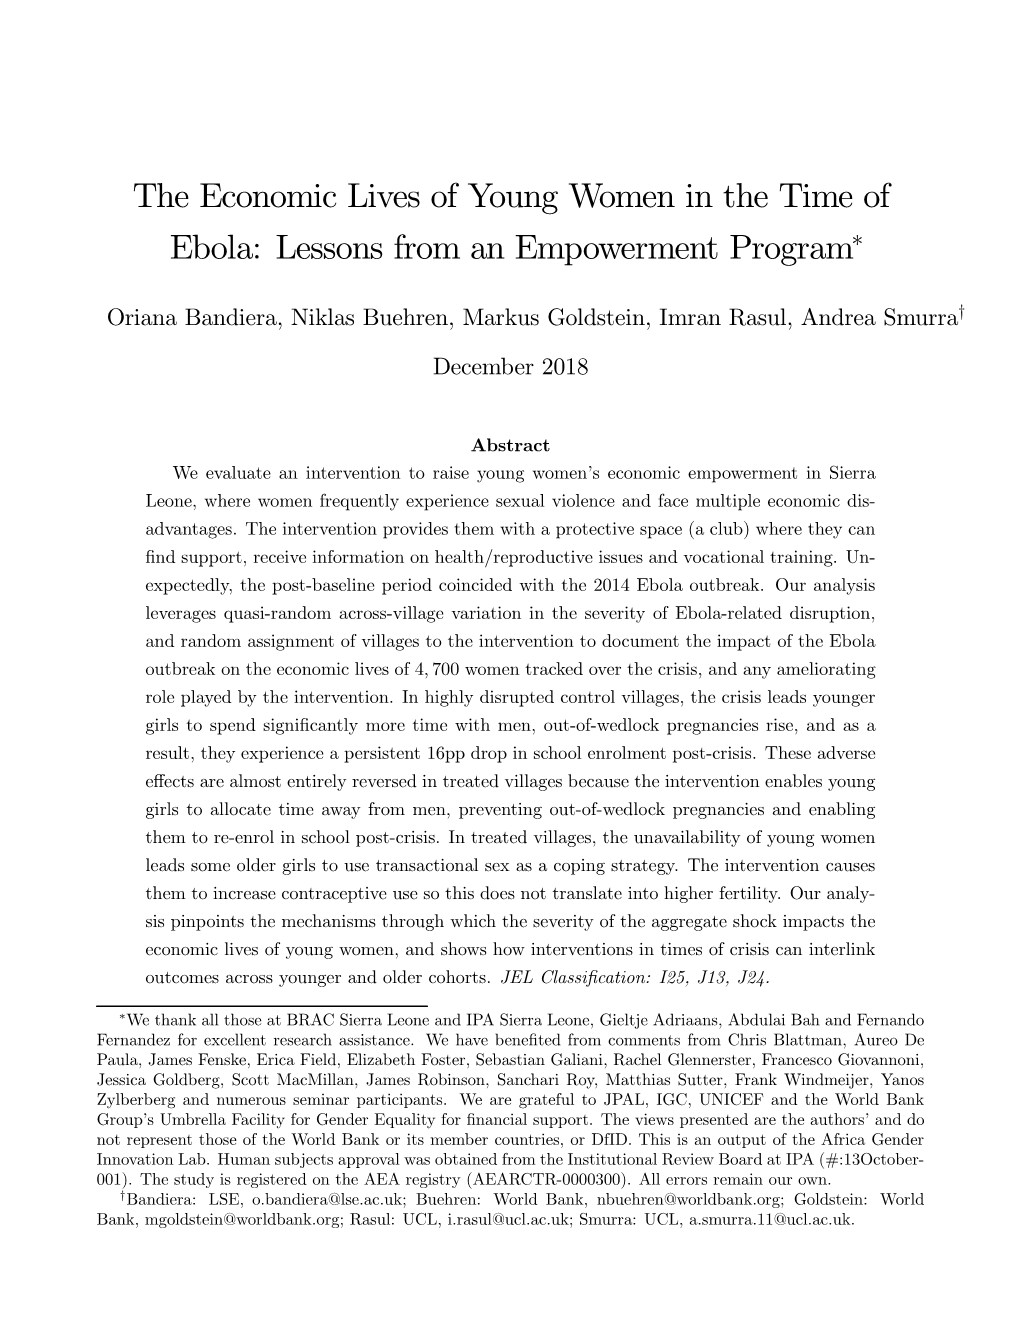 The Economic Lives of Young Women in the Time Of